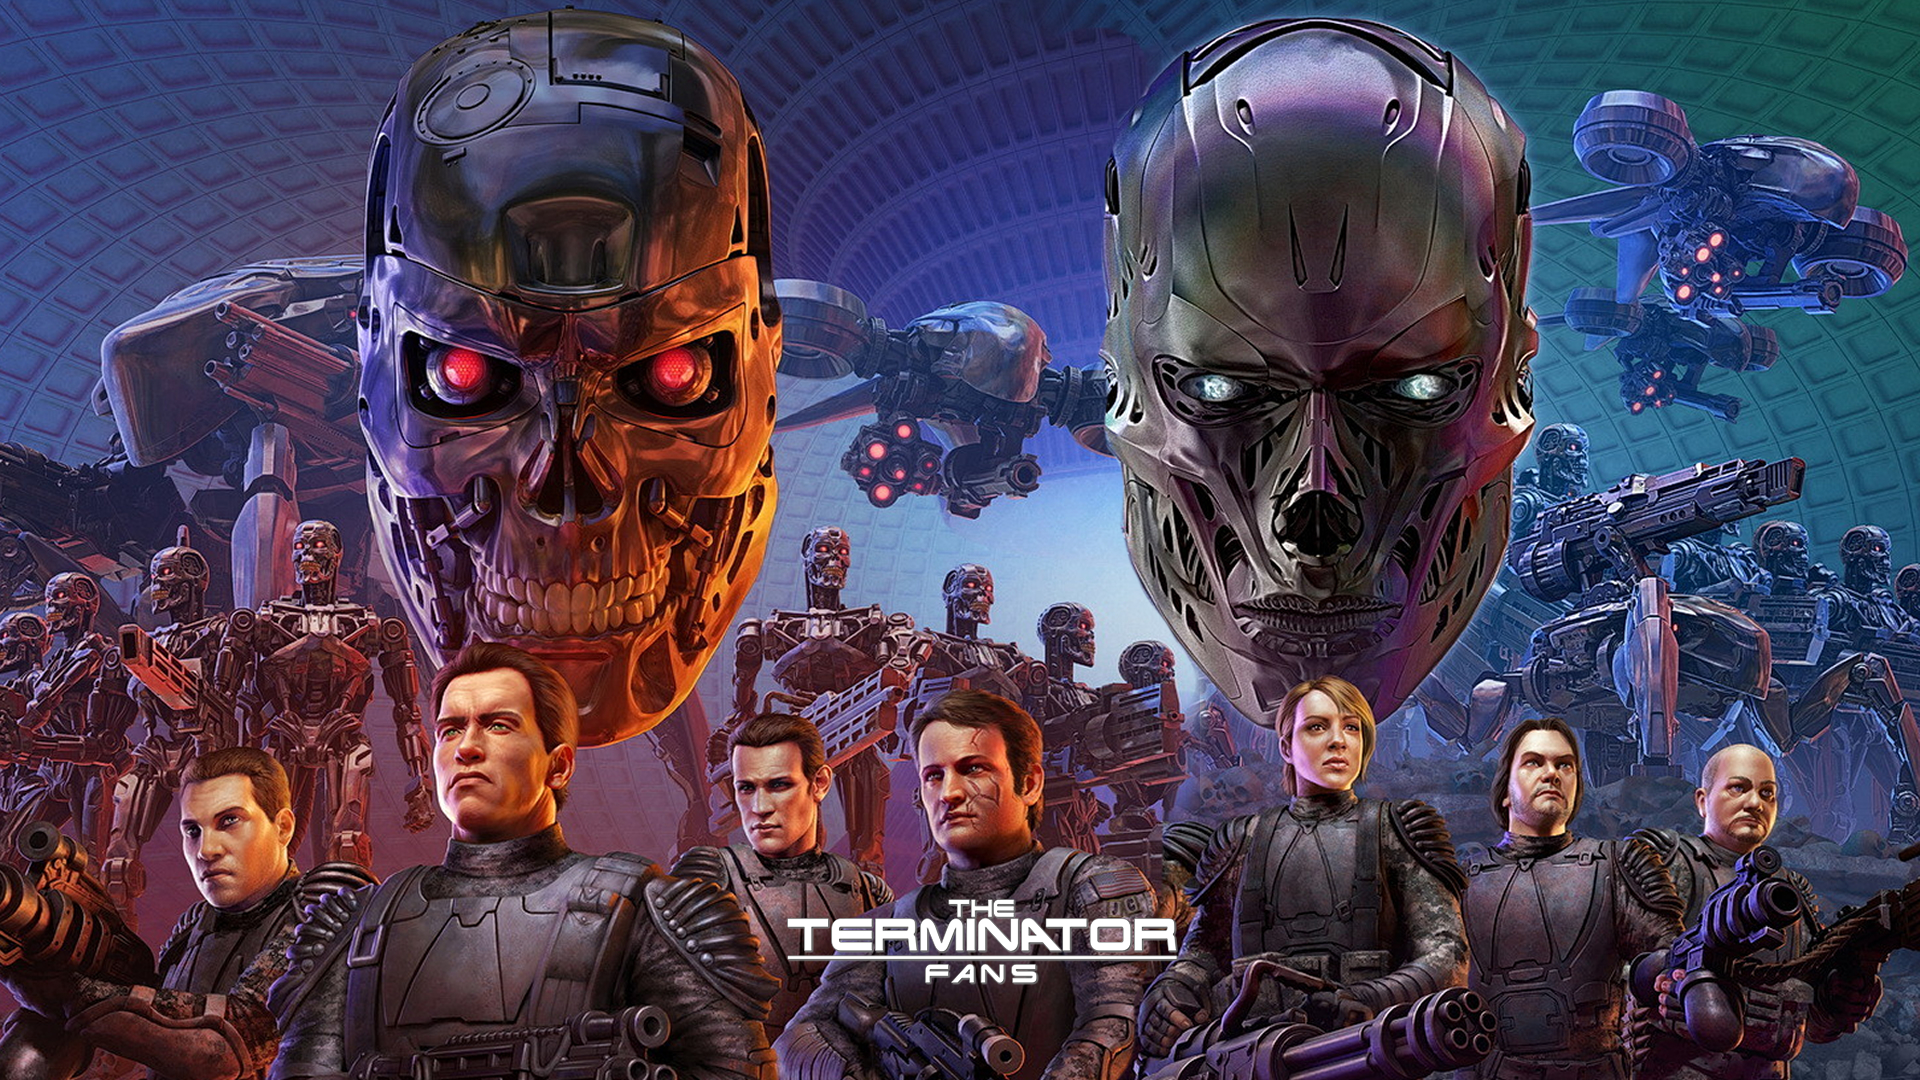 Terminator Genisys Board Game Launched and Funded on Kickstarter For Italian Terminator Fans